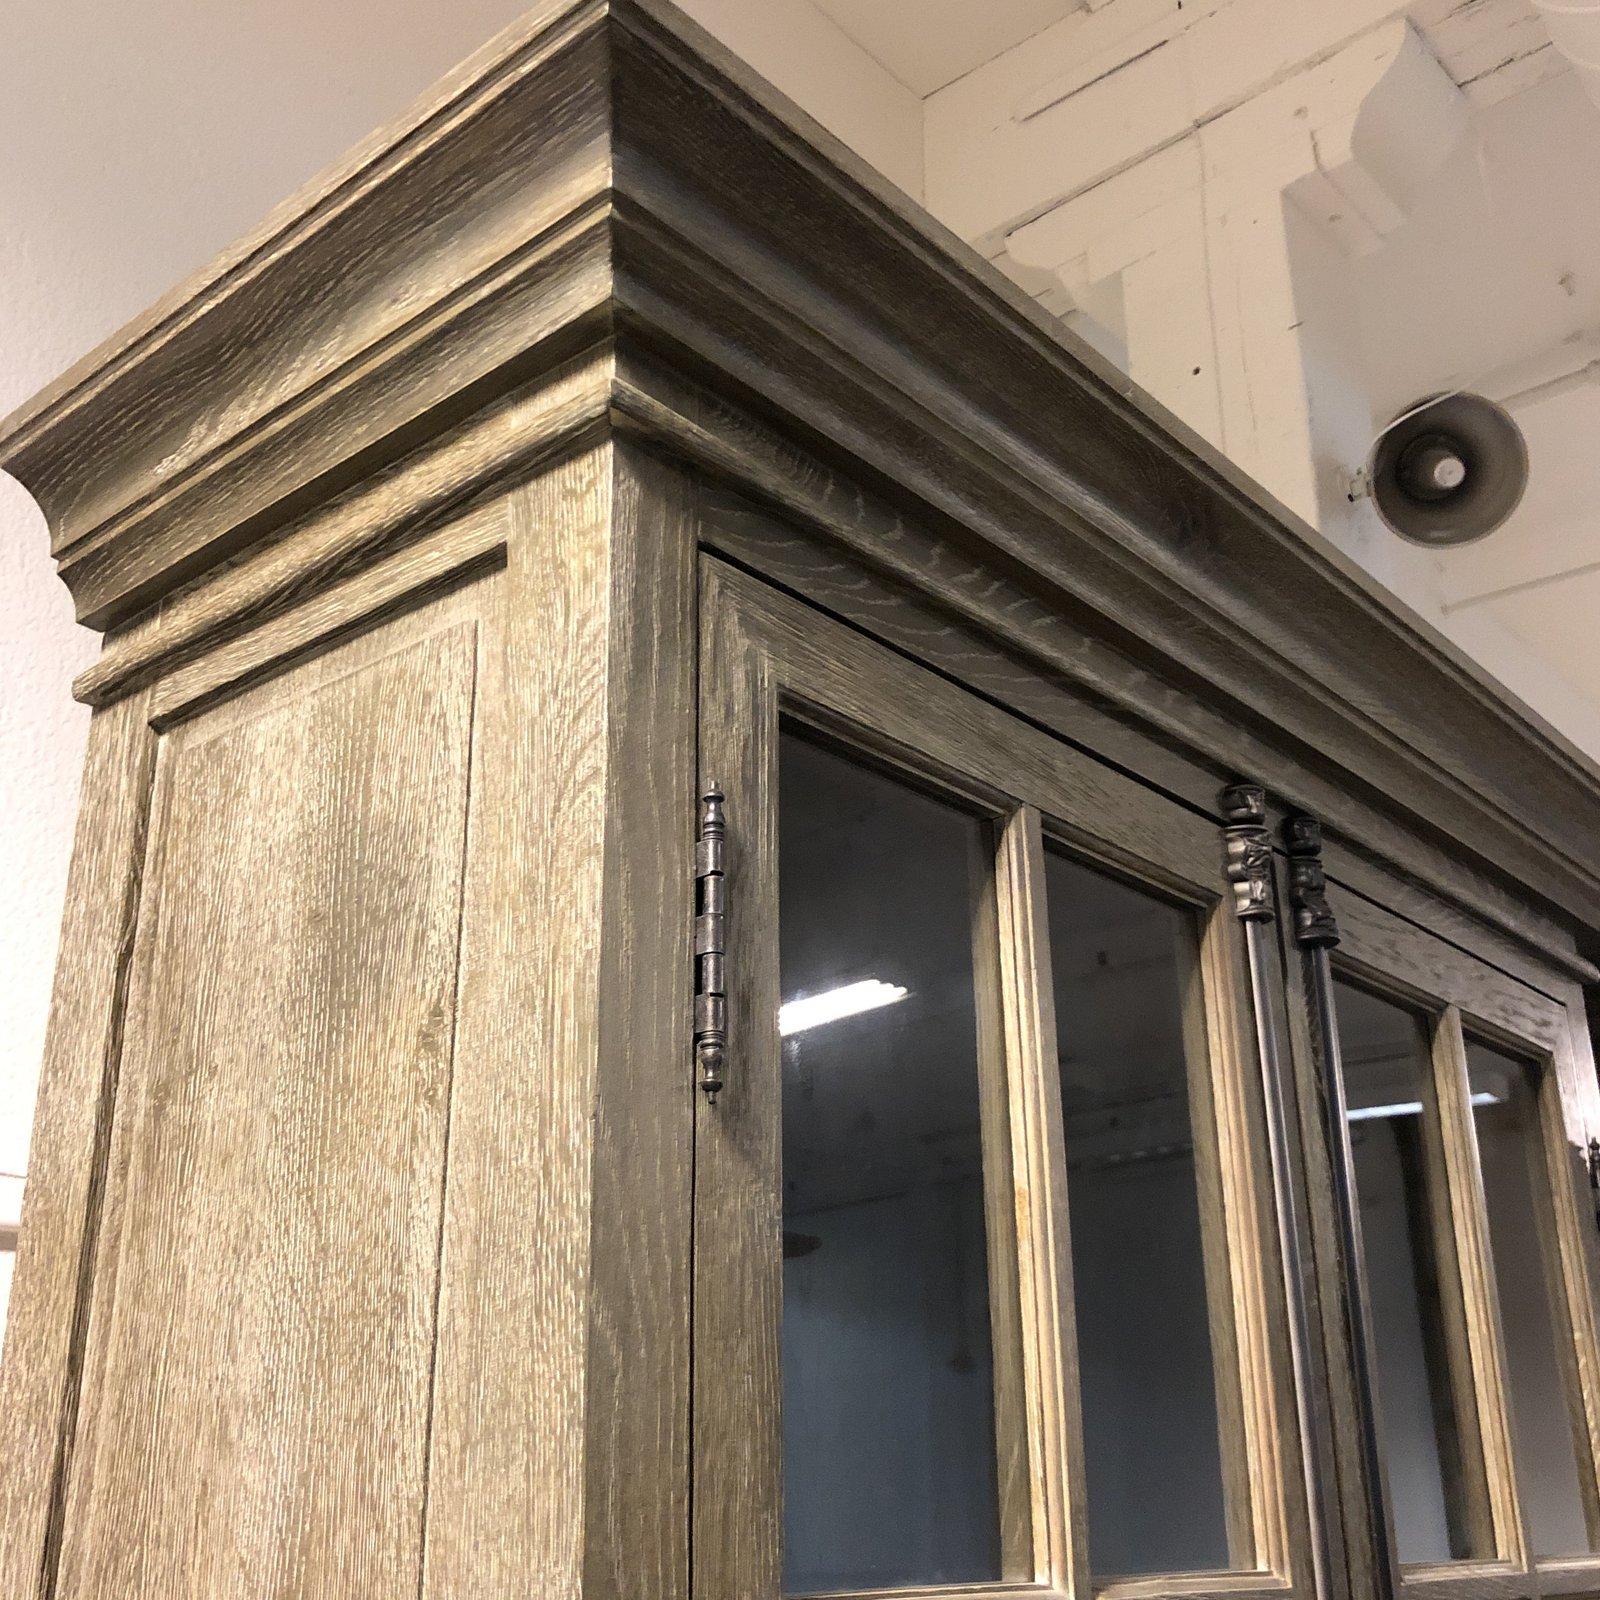 A French Casement double-door cabinet by Restoration Hardware. Designed by Luay Al-Rawi, whom was inspired by the Classic French furniture. Constructed of solid wood with two glass paneled doors. cast iron cremone hardware, a signature element of